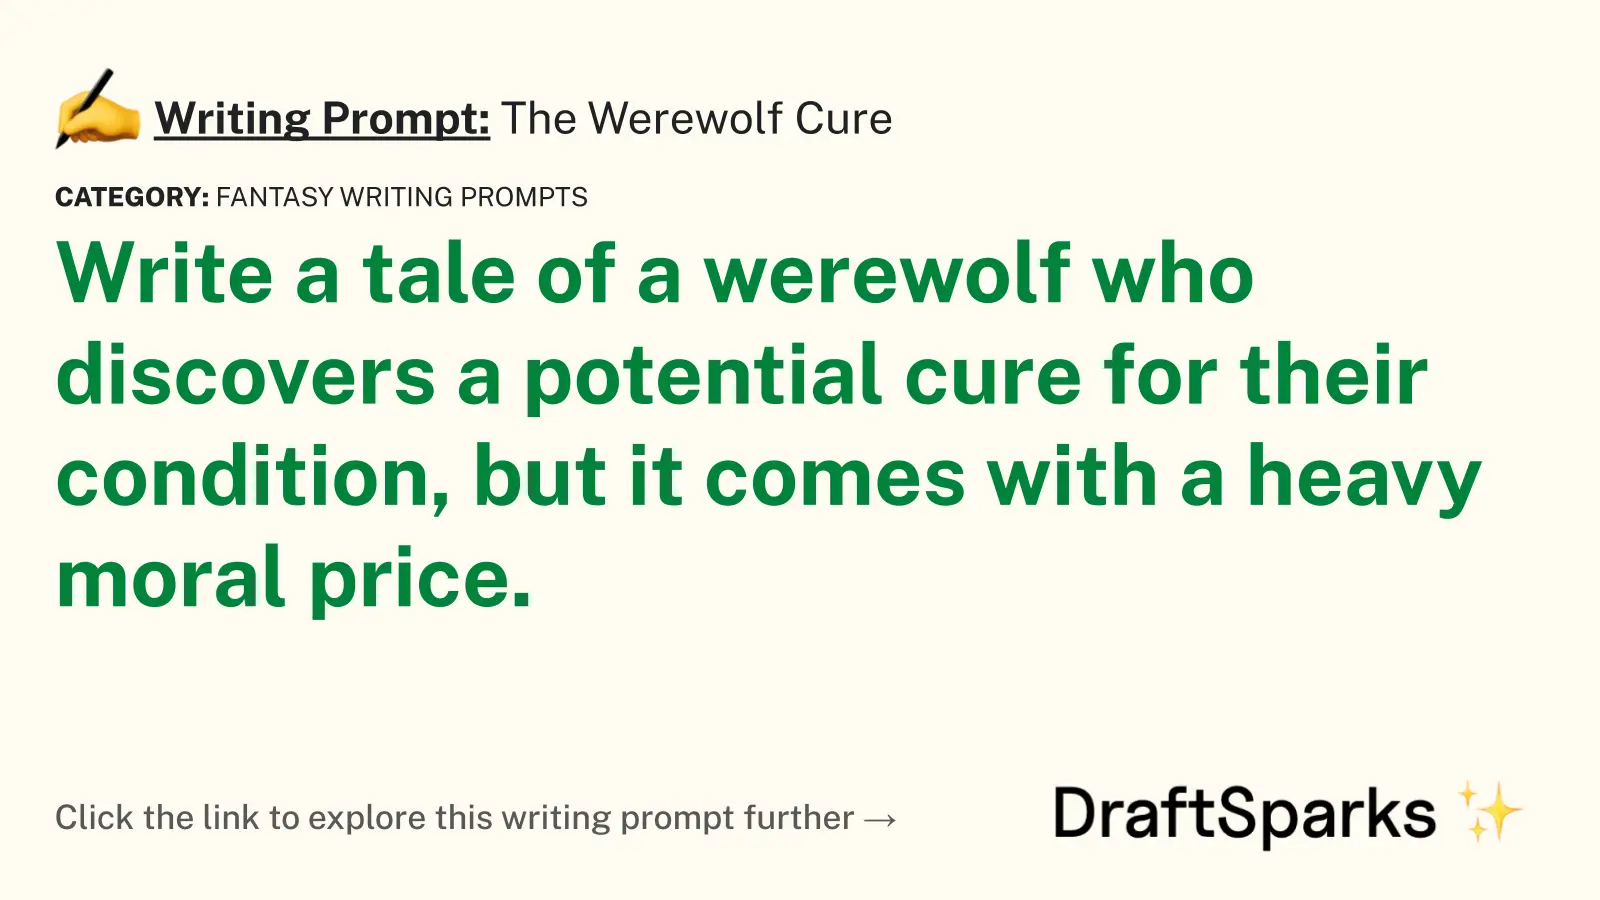 The Werewolf Cure